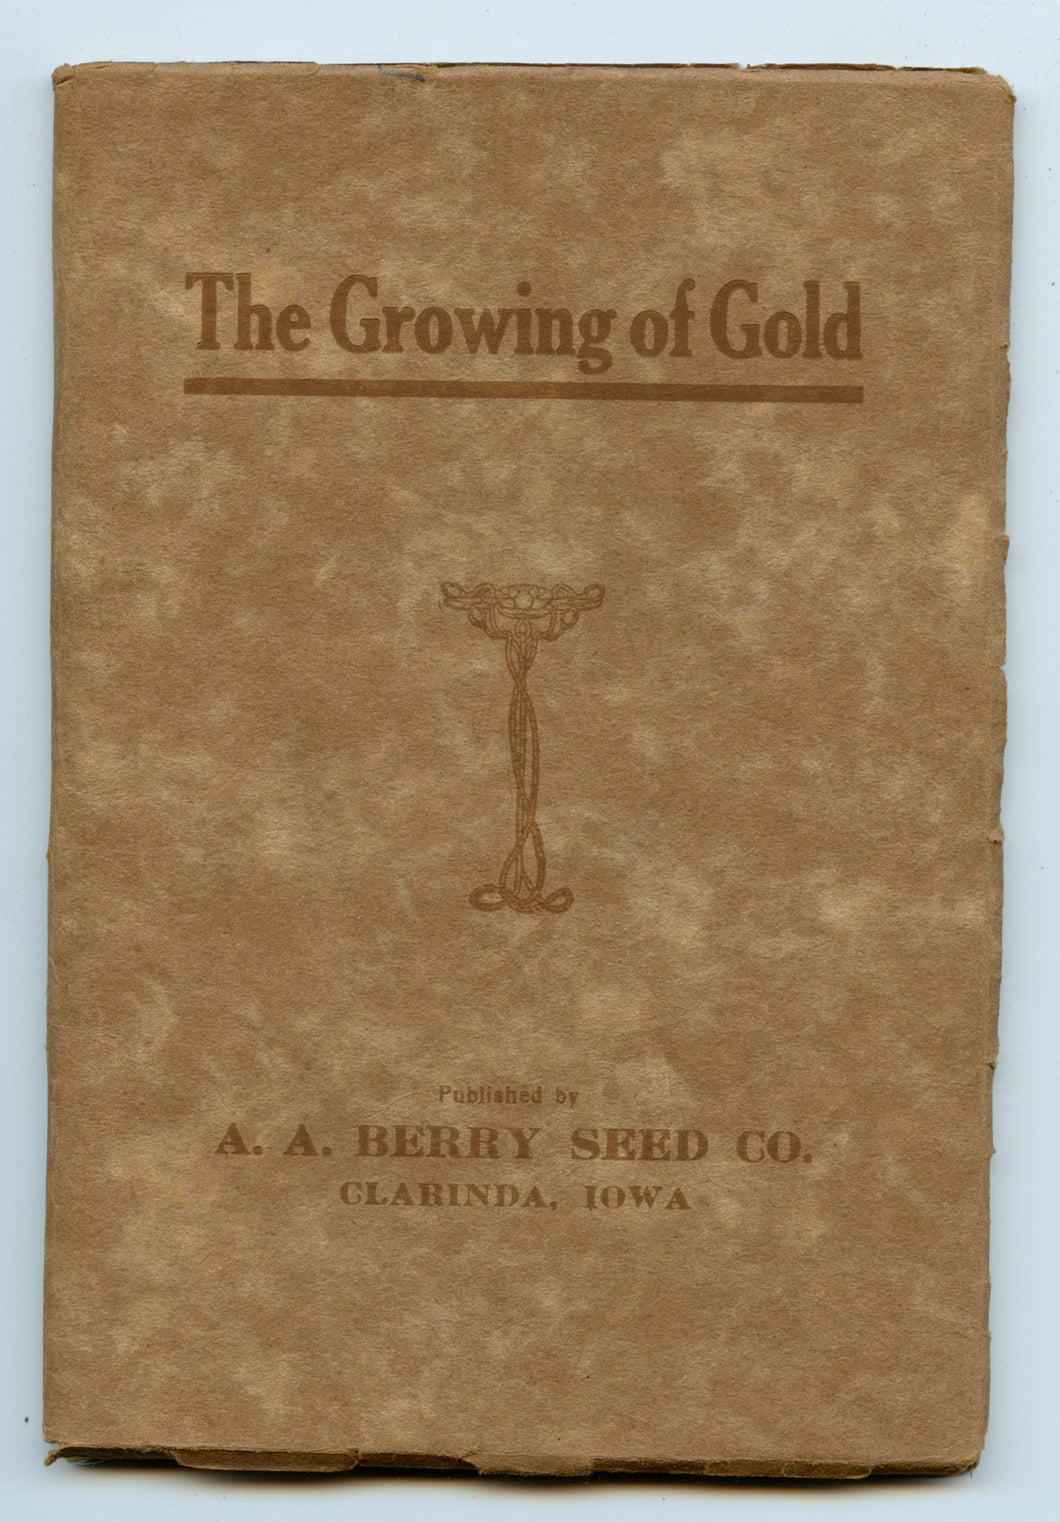 The Growing of Gold: Facts about Growing Alfalfa, the Practical Gold Mine for the Farmer of Today